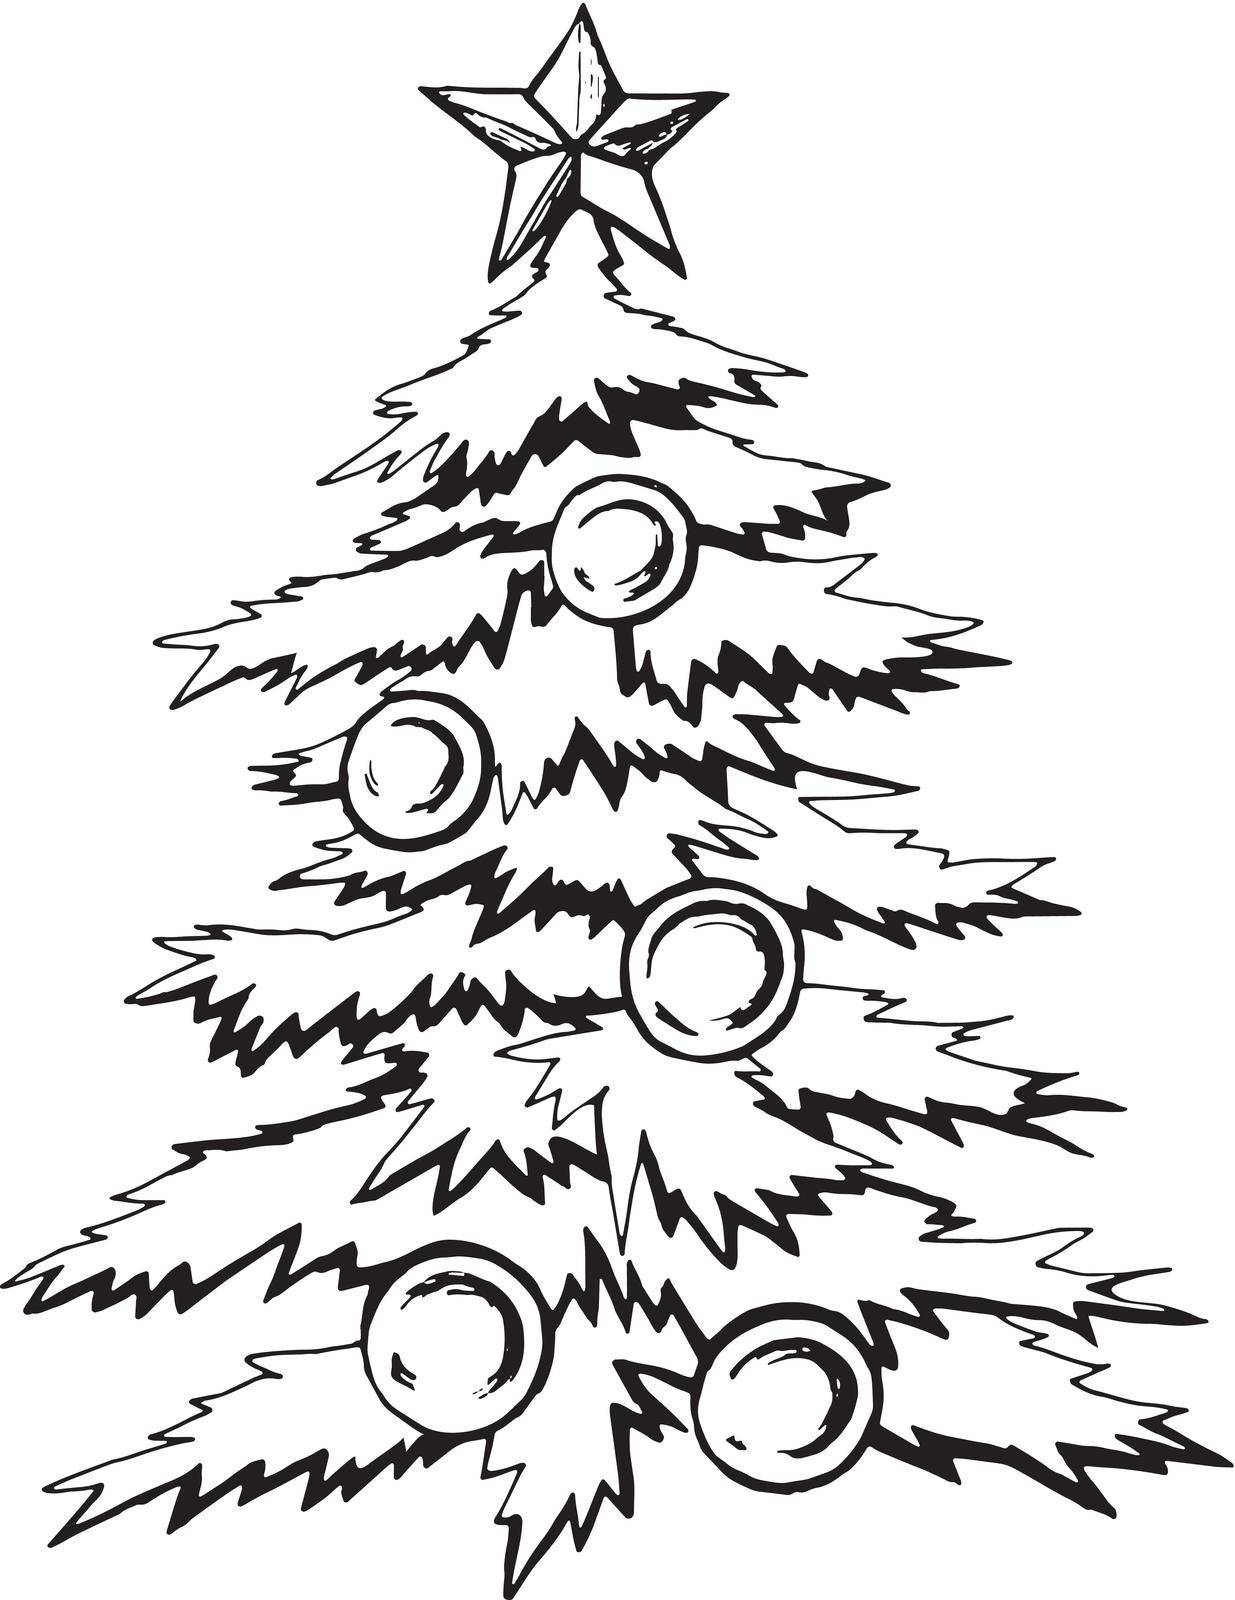 Hand drawn painted Christmas tree decorated with balls. For the creation of holiday cards, backgrounds and ornaments. Vector illustration.